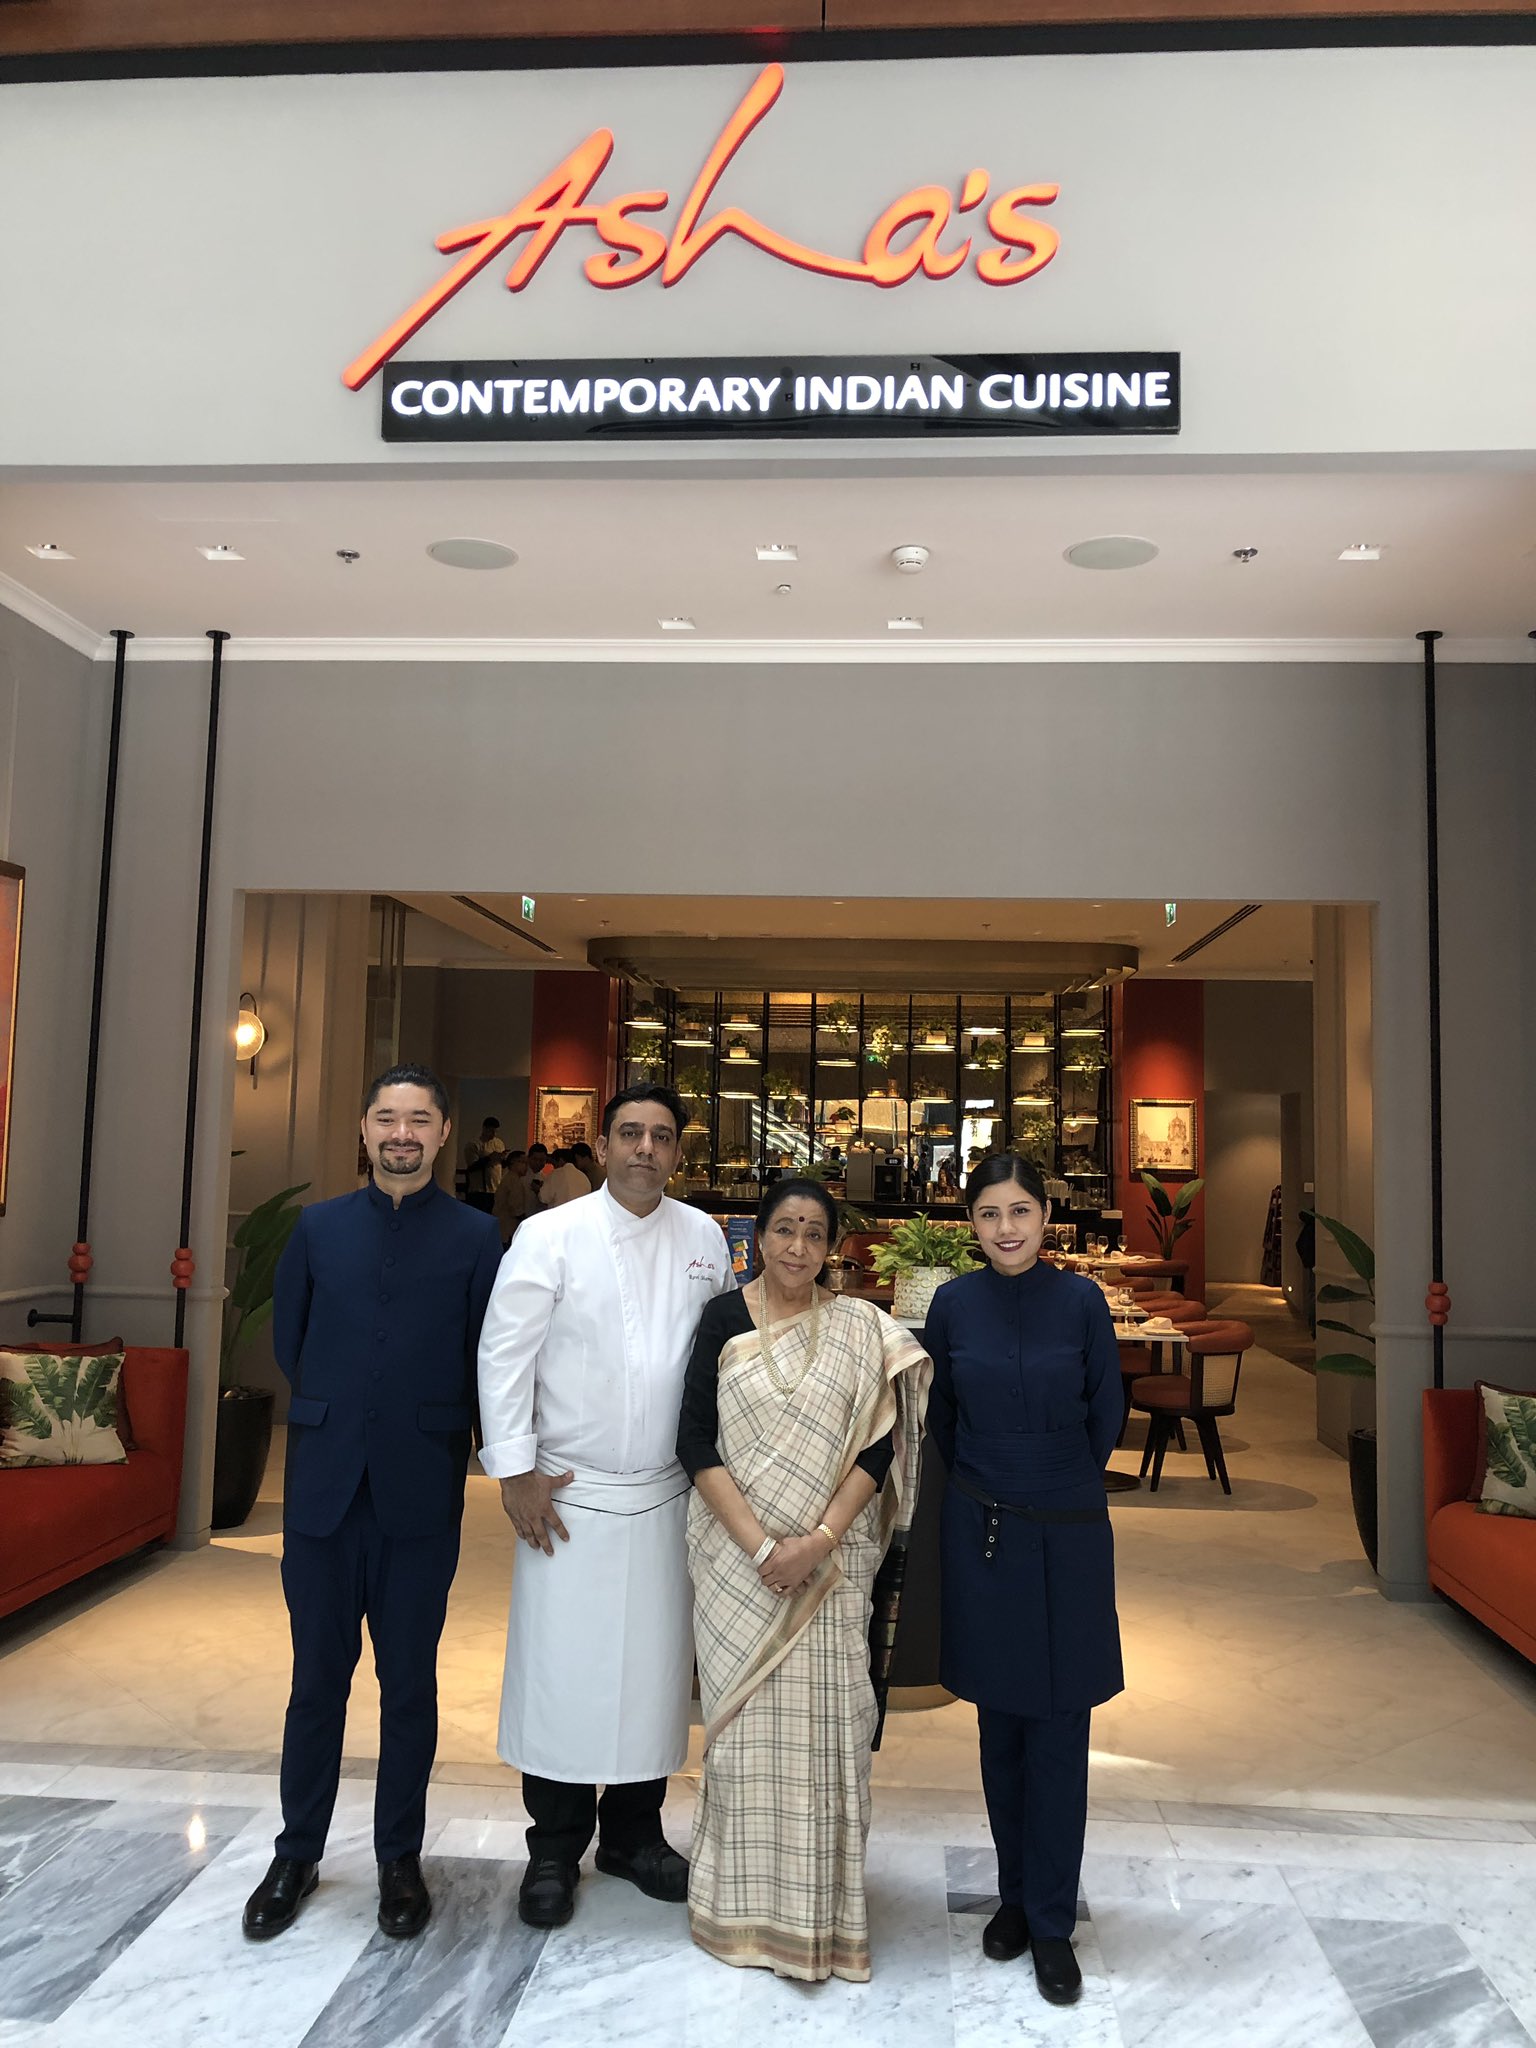 ashabhosle on Twitter: "Opening the latest Asha's Restaurants (with an  entirely new look) at the Galleria Mall in Abu Dhabi.  https://t.co/gK4DstyNOL" / Twitter